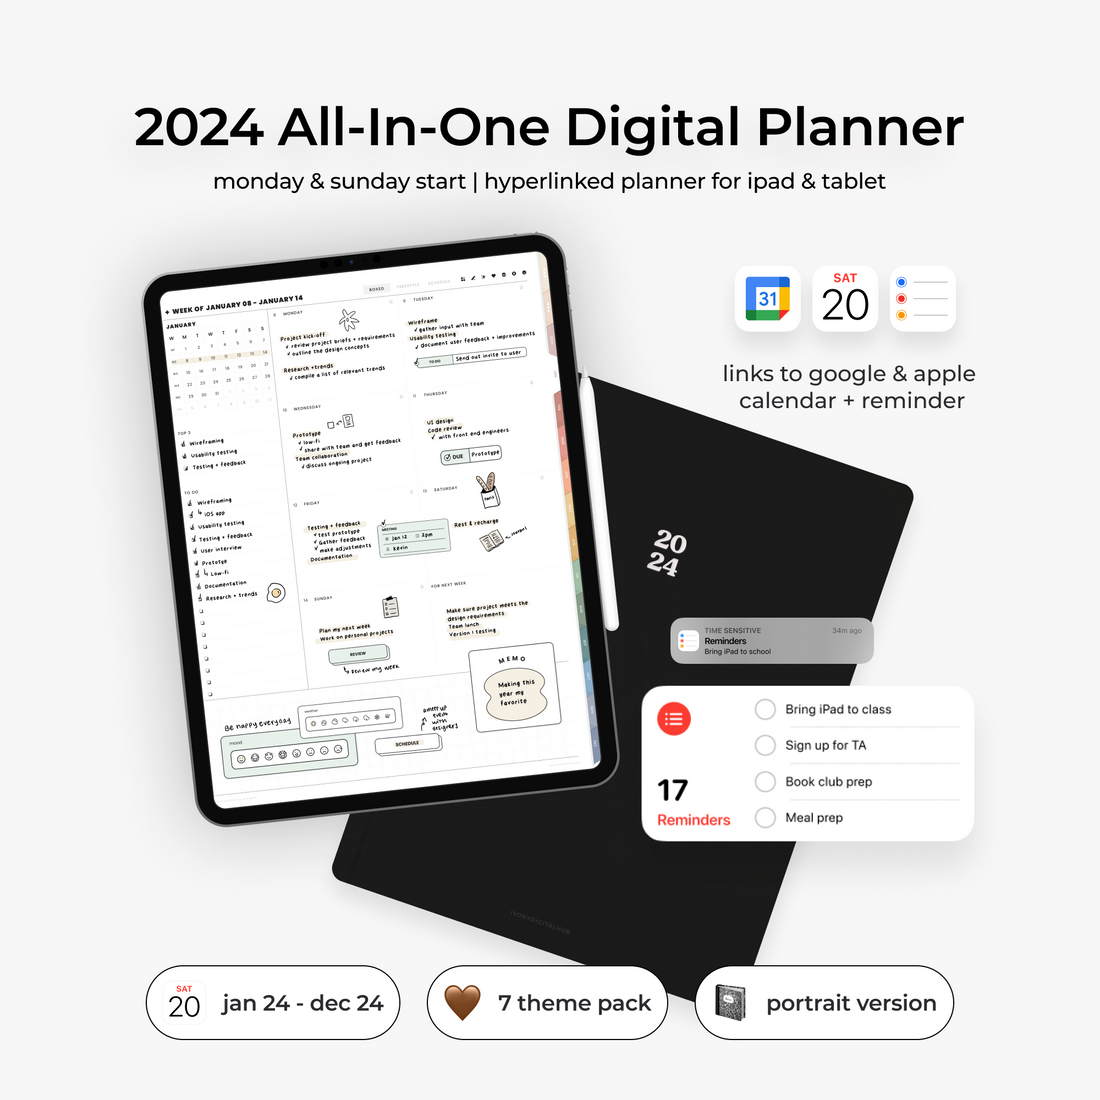 2024 The Ultimate Life Planner